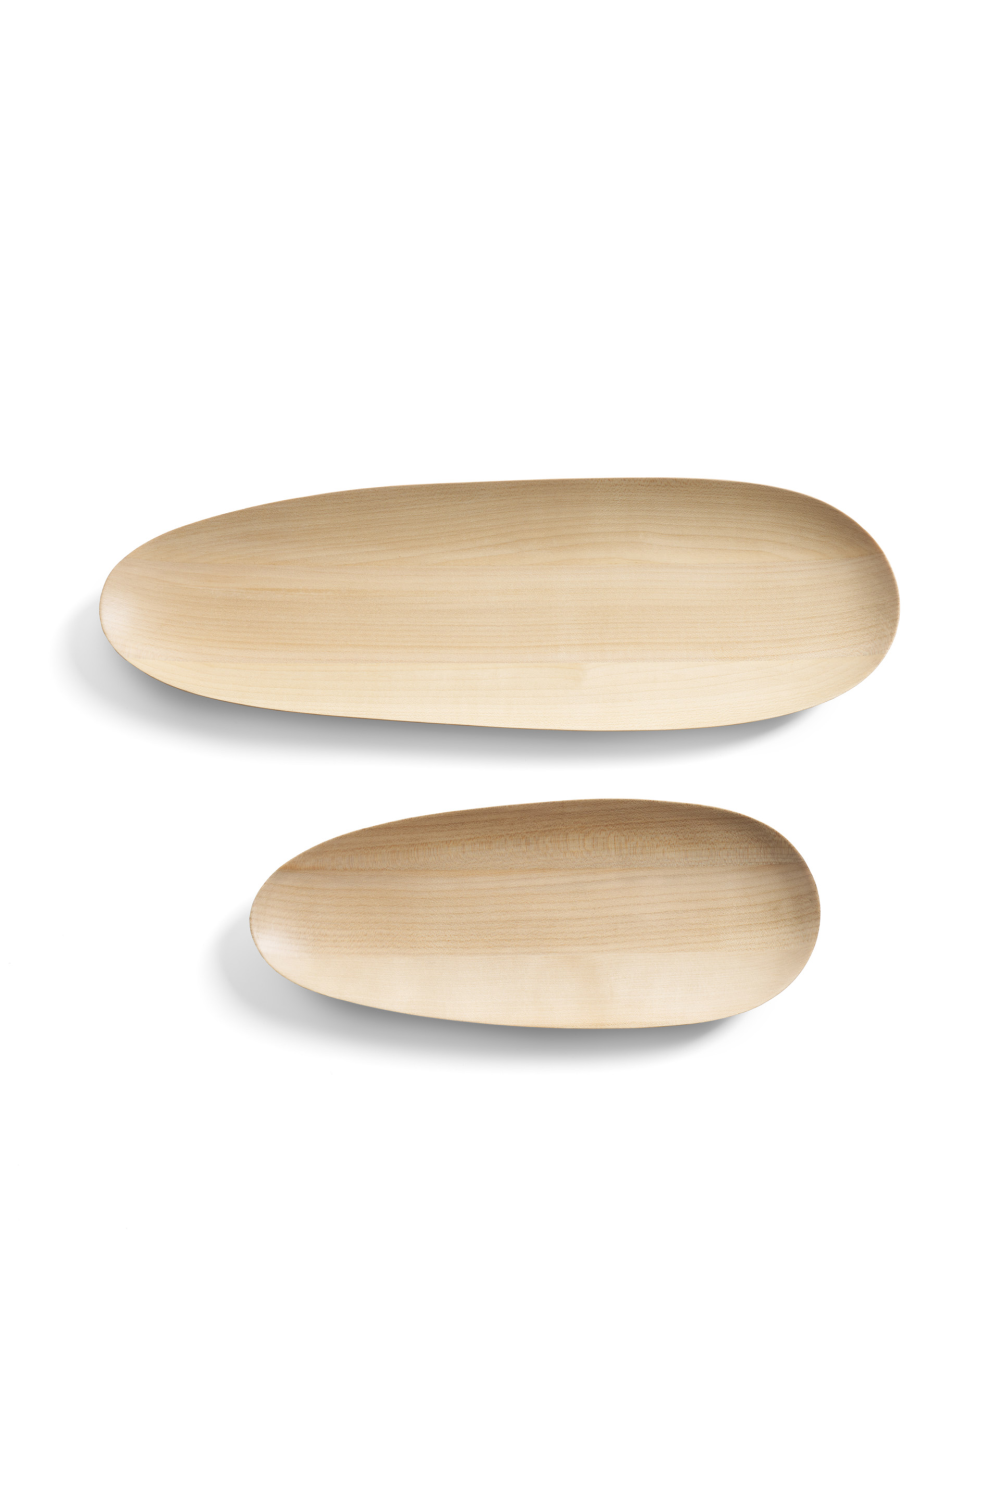 Hand-carved Oval Boards Set (2) | Ethnicraft Thin | Oroa.com